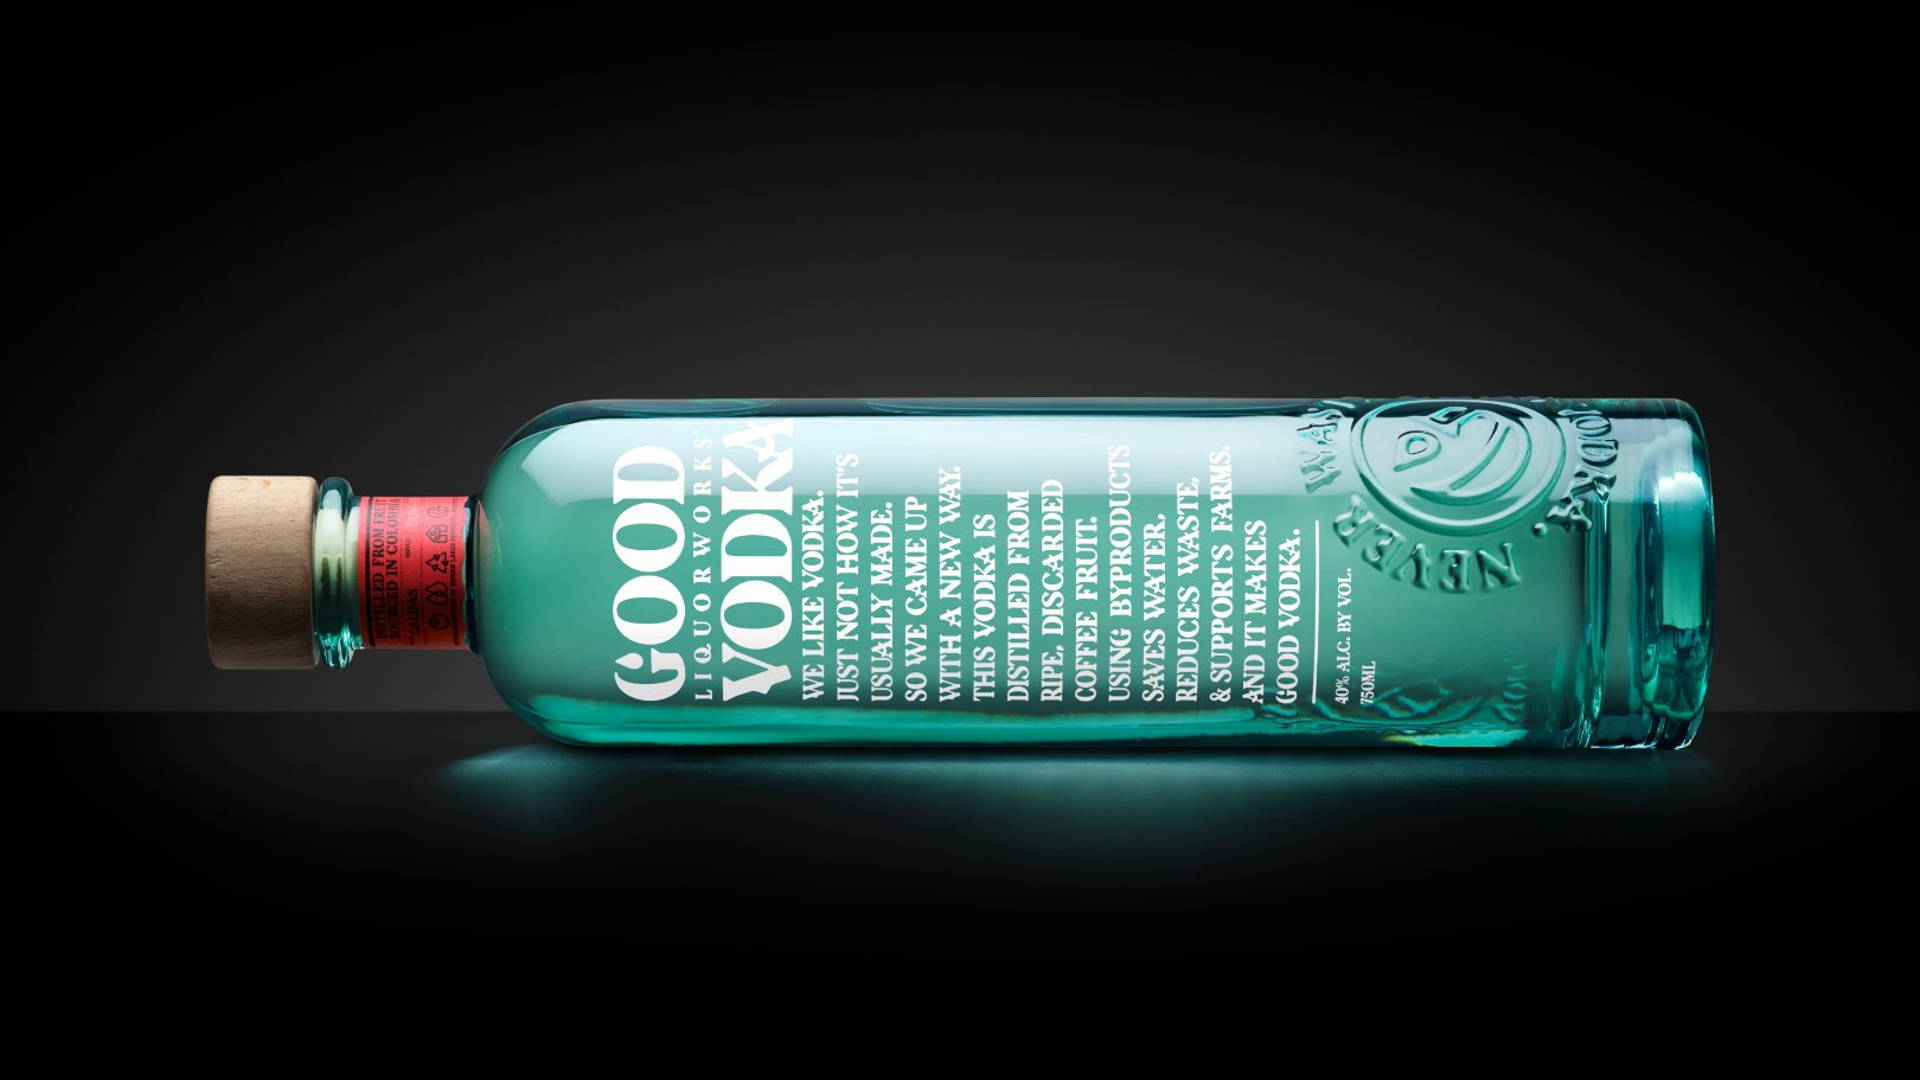 Good Vodka is making premium vodka from coffee fruit (which would probably be discarded)